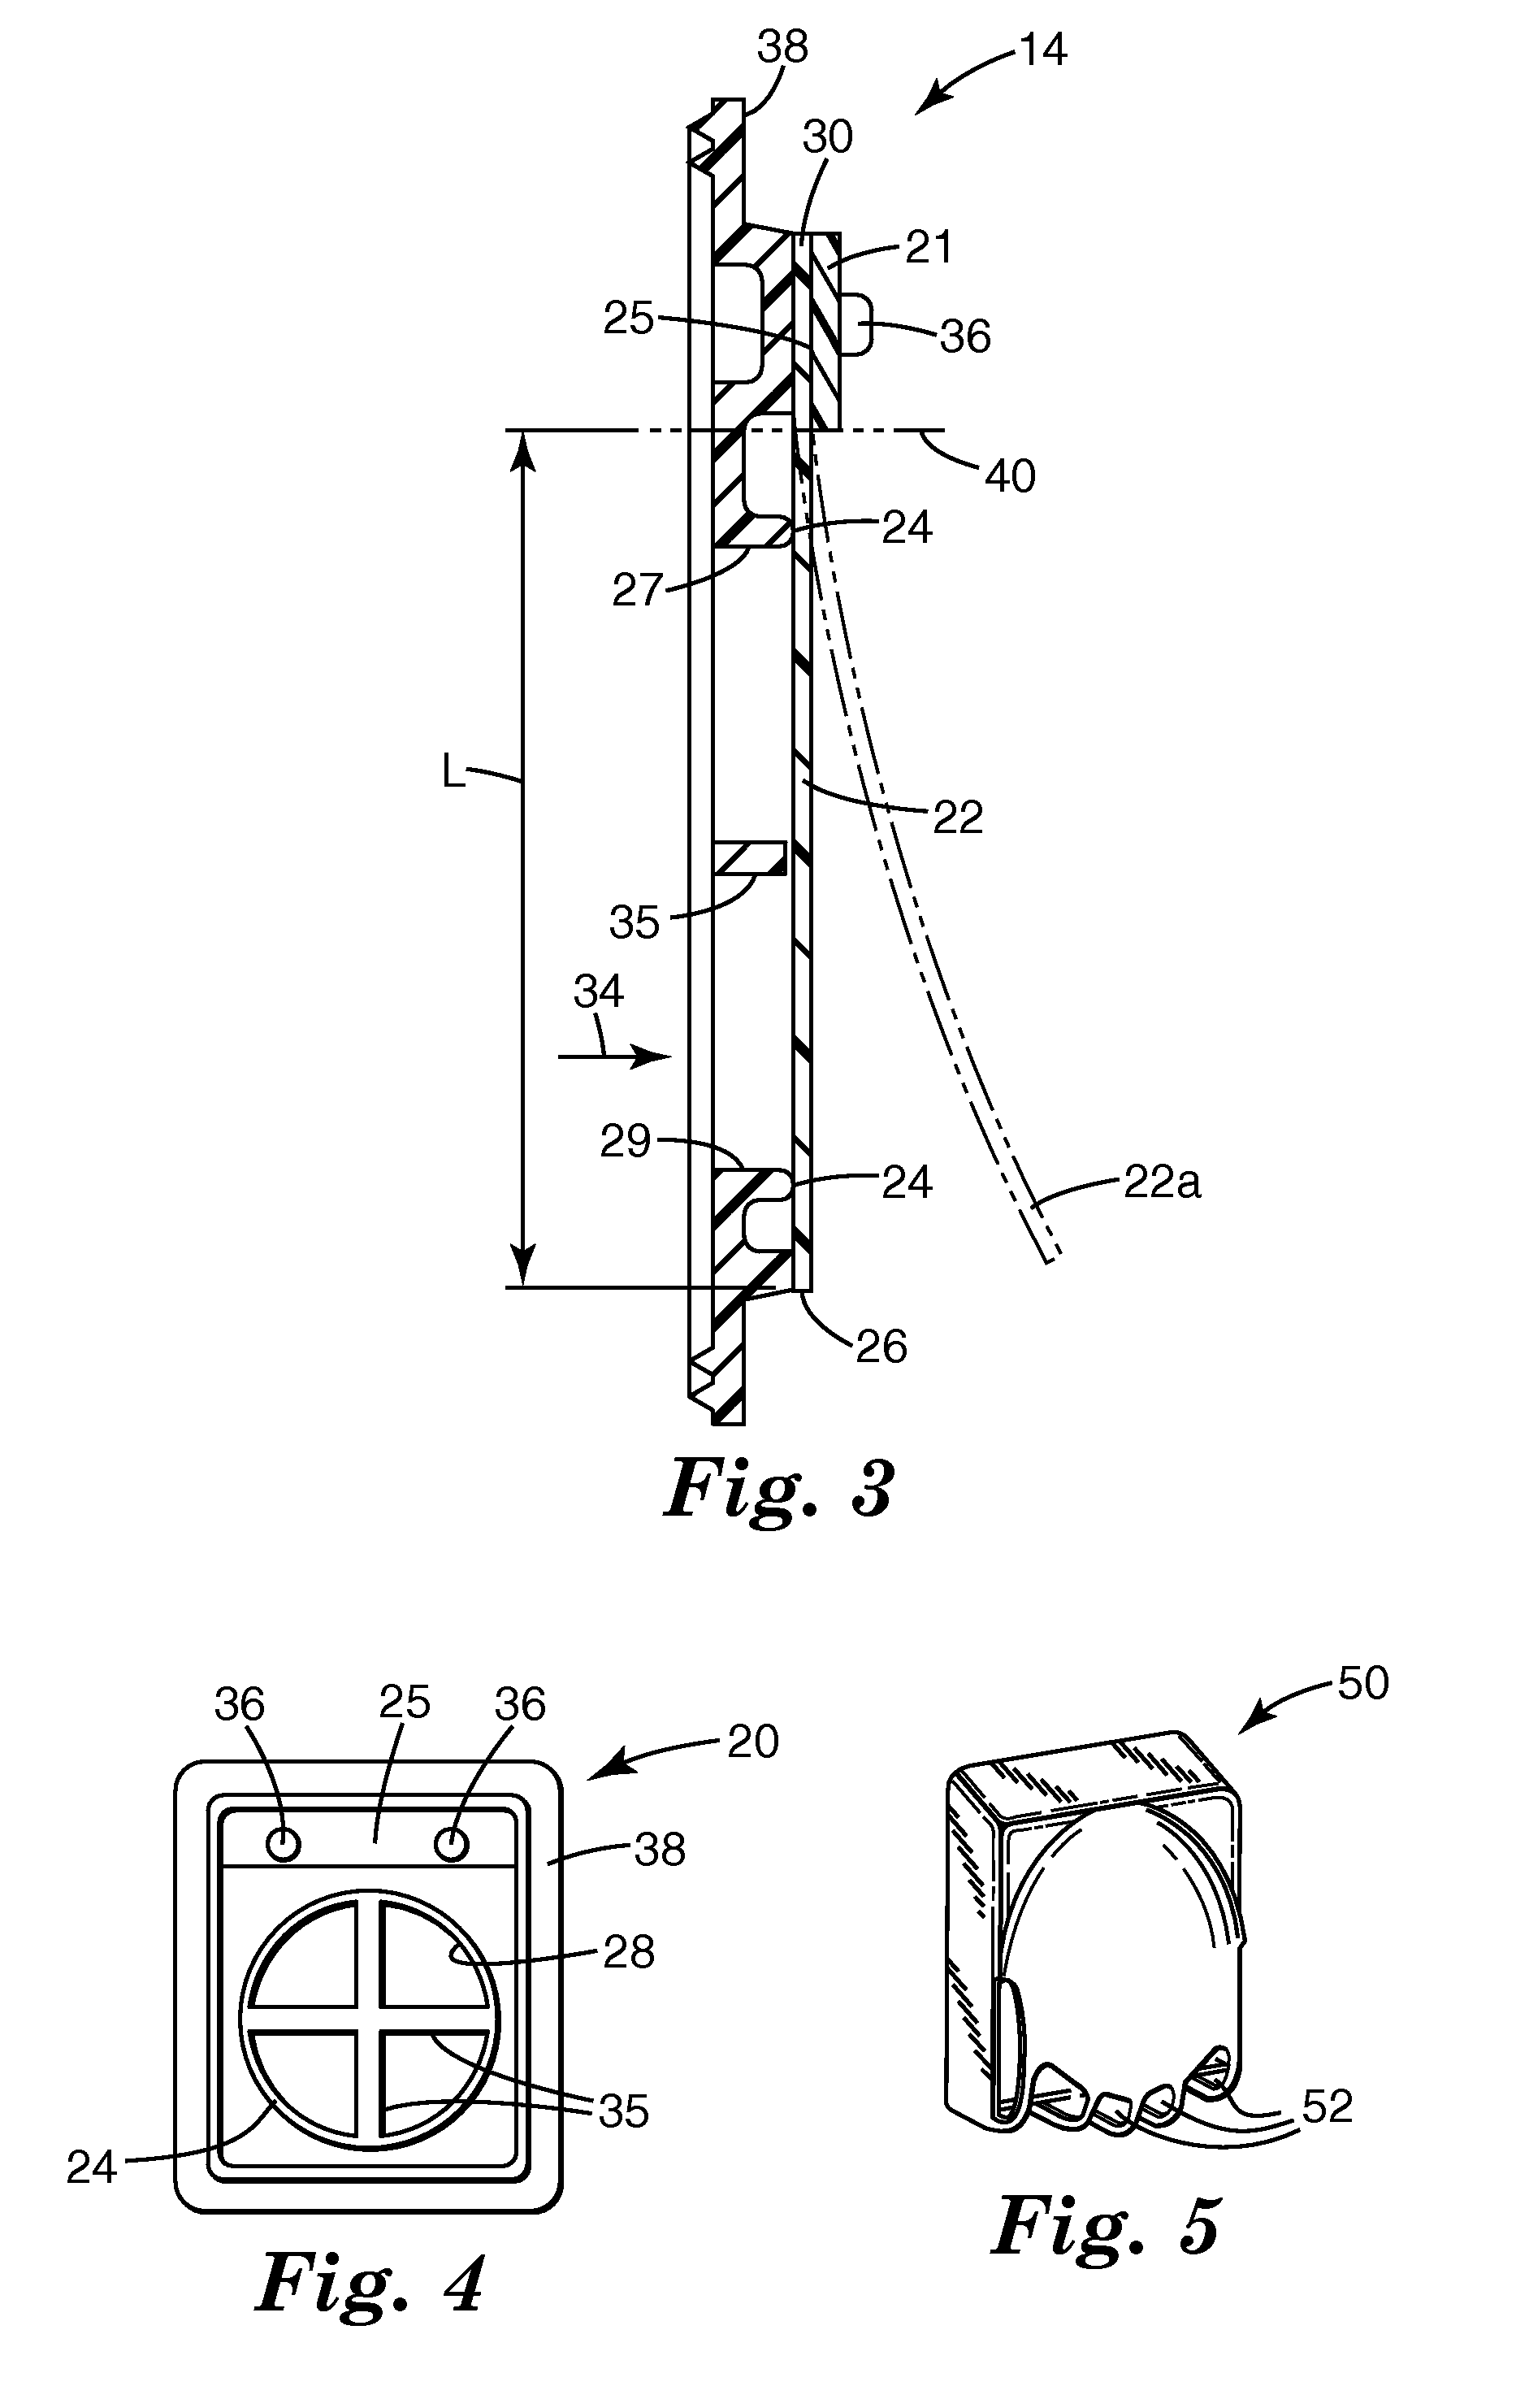 Filtering face mask with a unidirectional valve having a stiff unbiased flexible flap